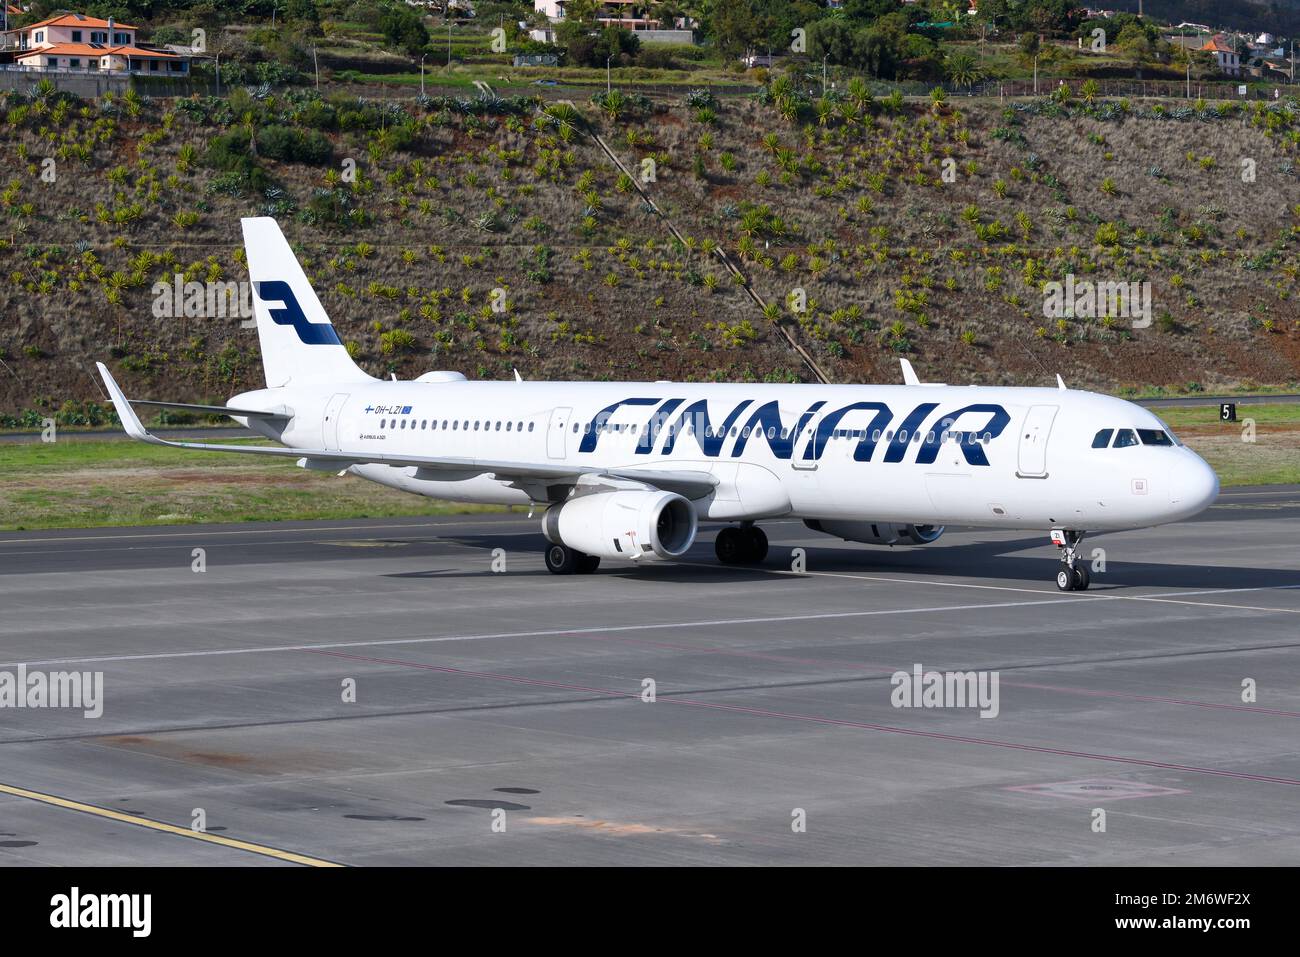 Finnair airline Airbus A321 airplane taxiing. Aircraft A321 of finish airline. Plane of Finnair registered as OH-LZI. Stock Photo